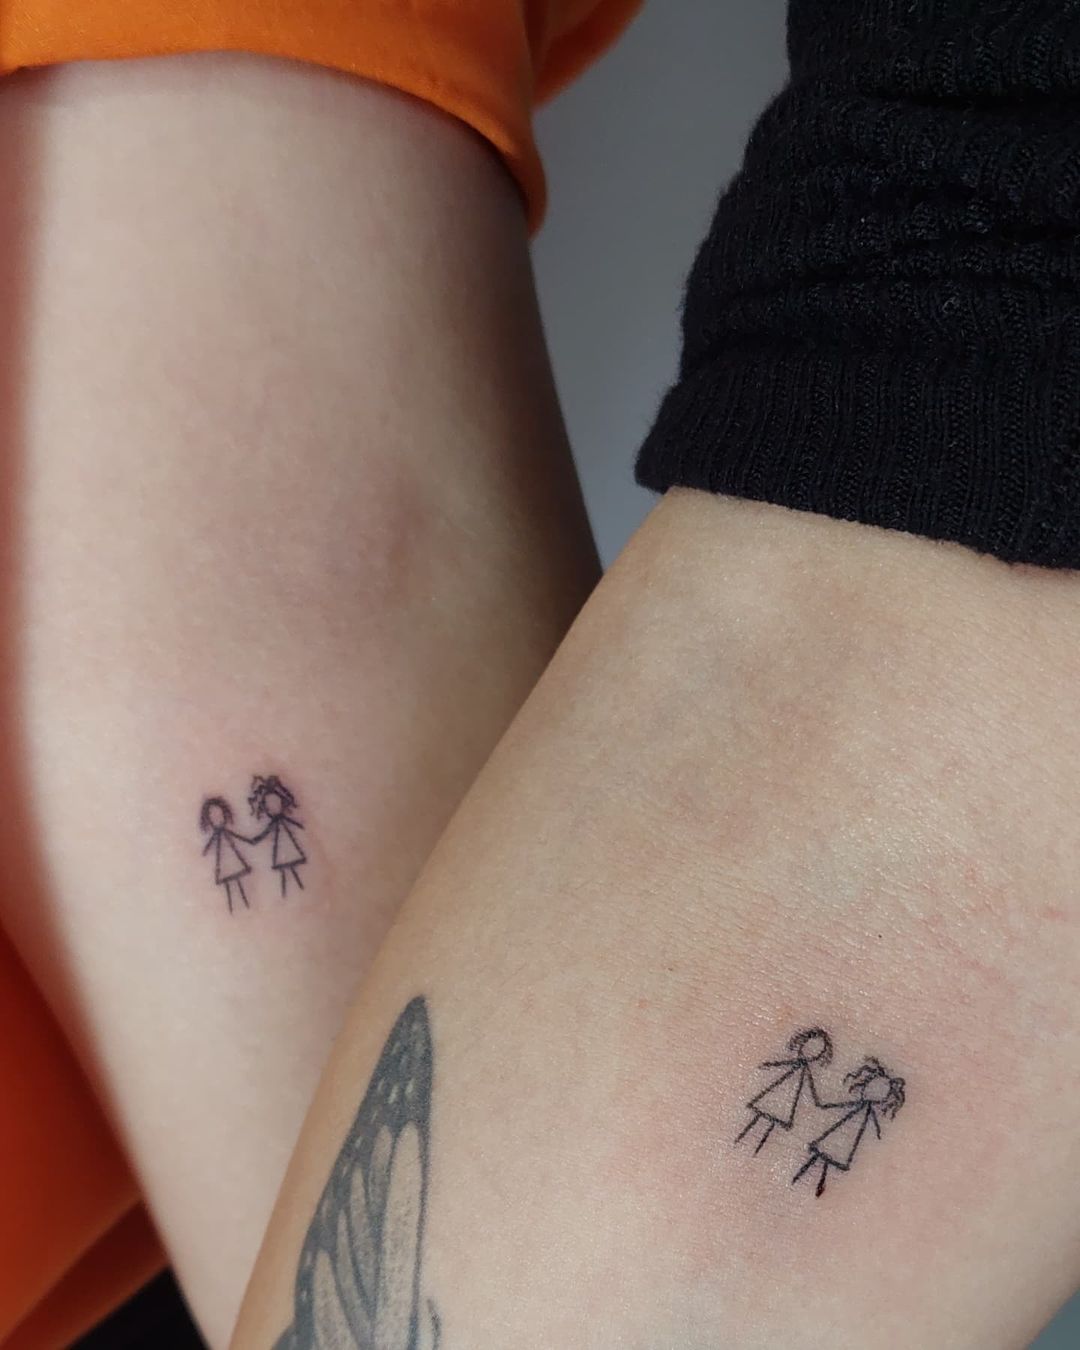 50 Matching Couple Tattoo Ideas To Try with Your Significant Other - Hairstyle